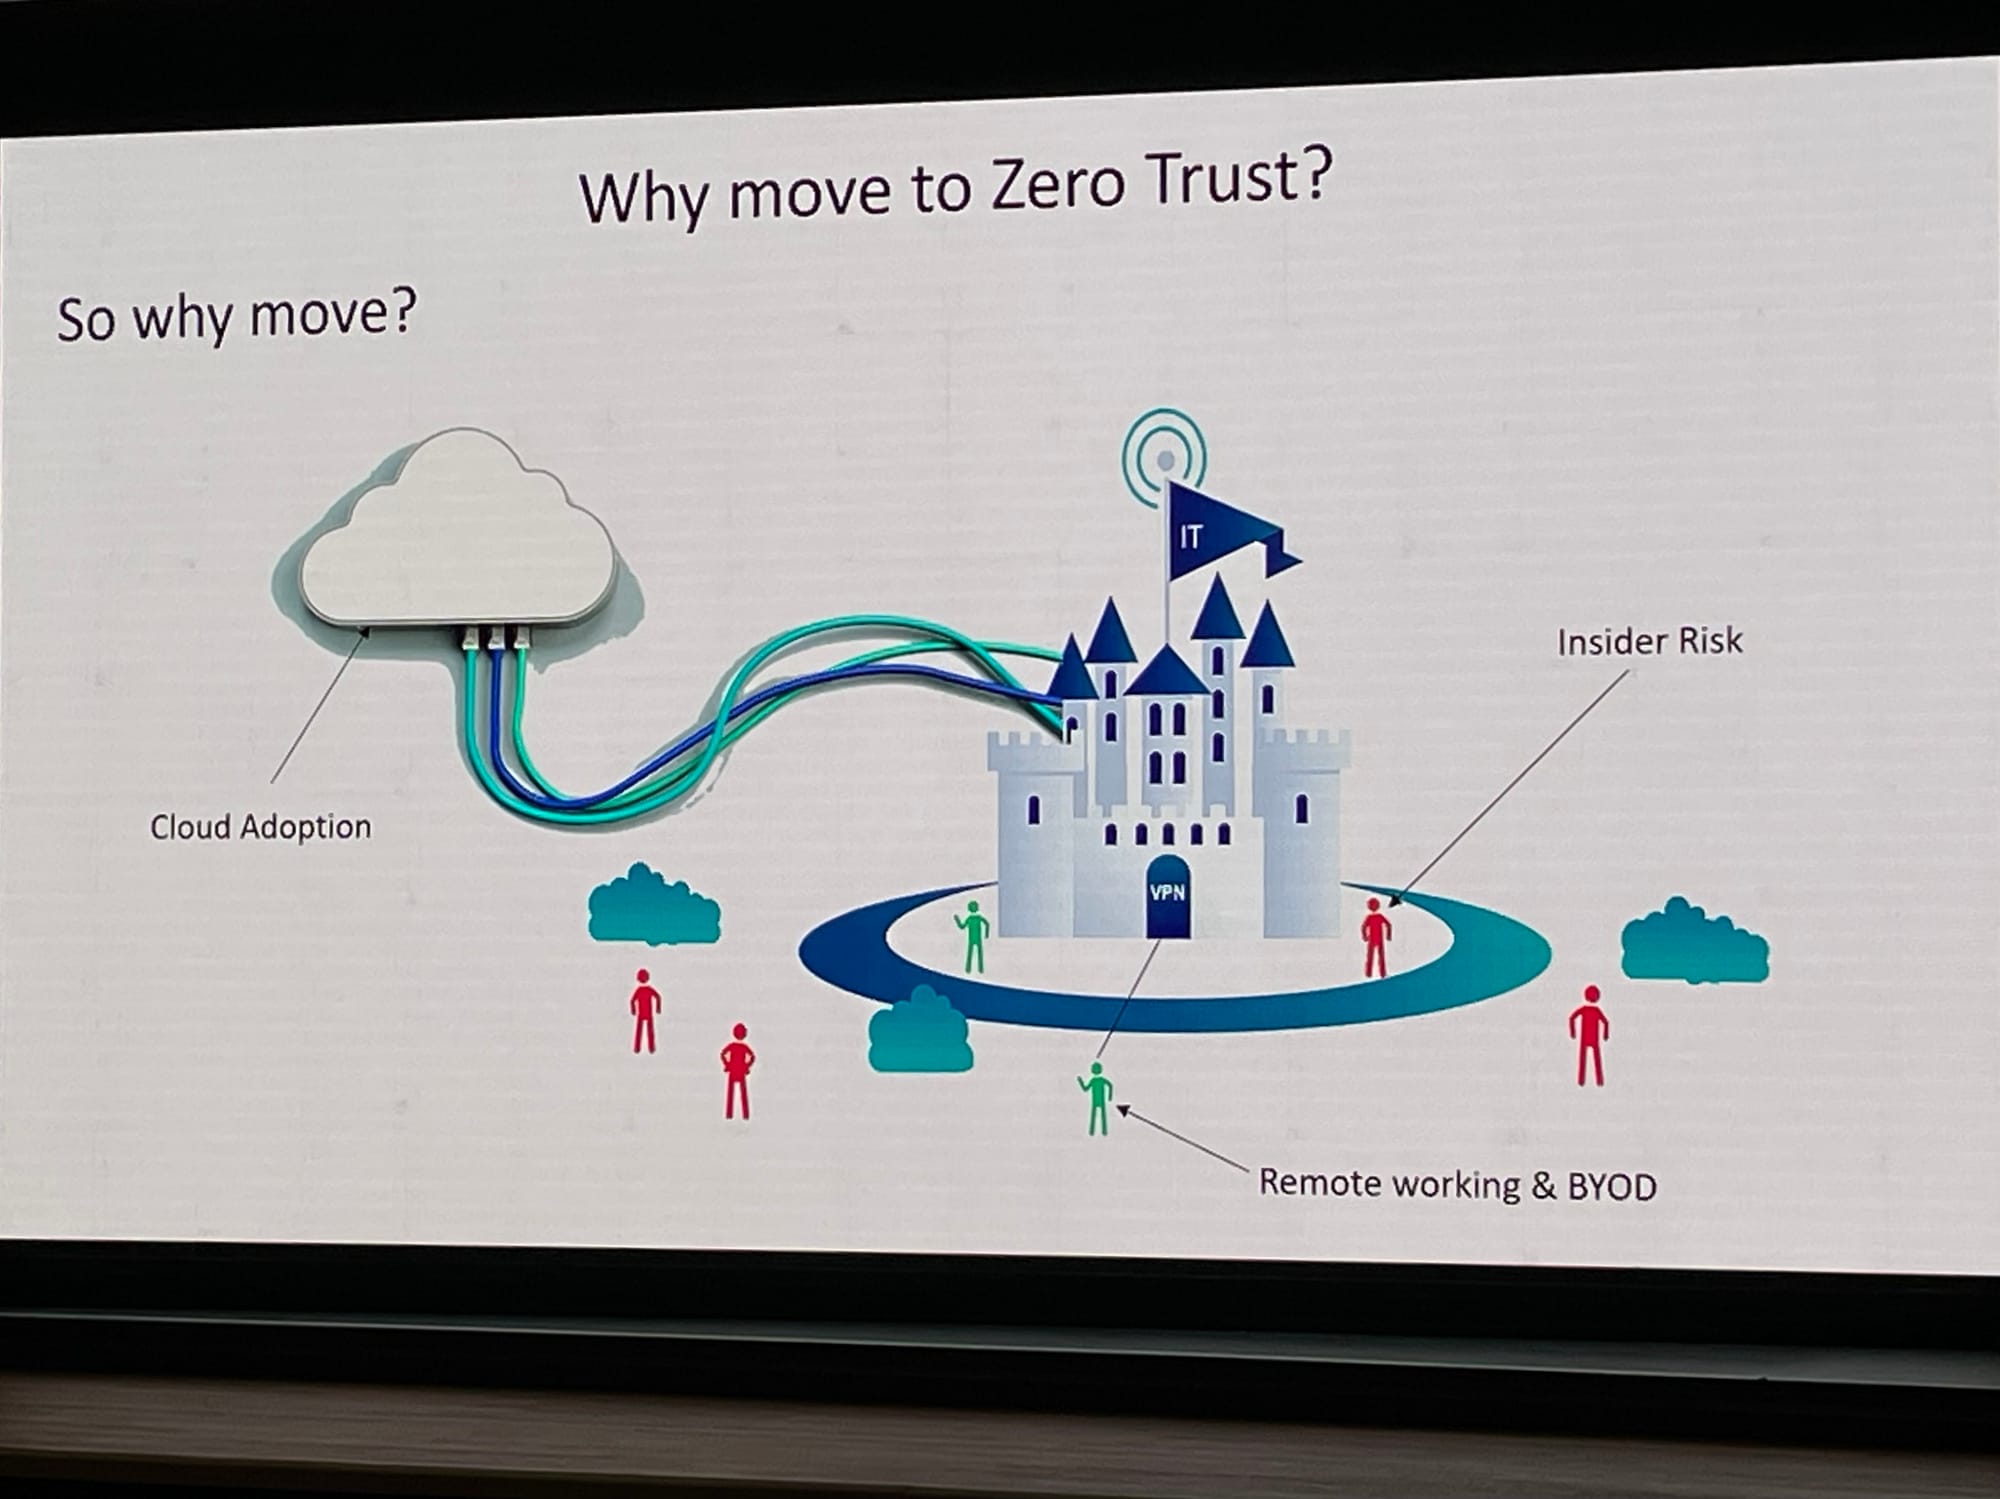 We're moving away from the 'moat and castle' towards a 'zero trust world'